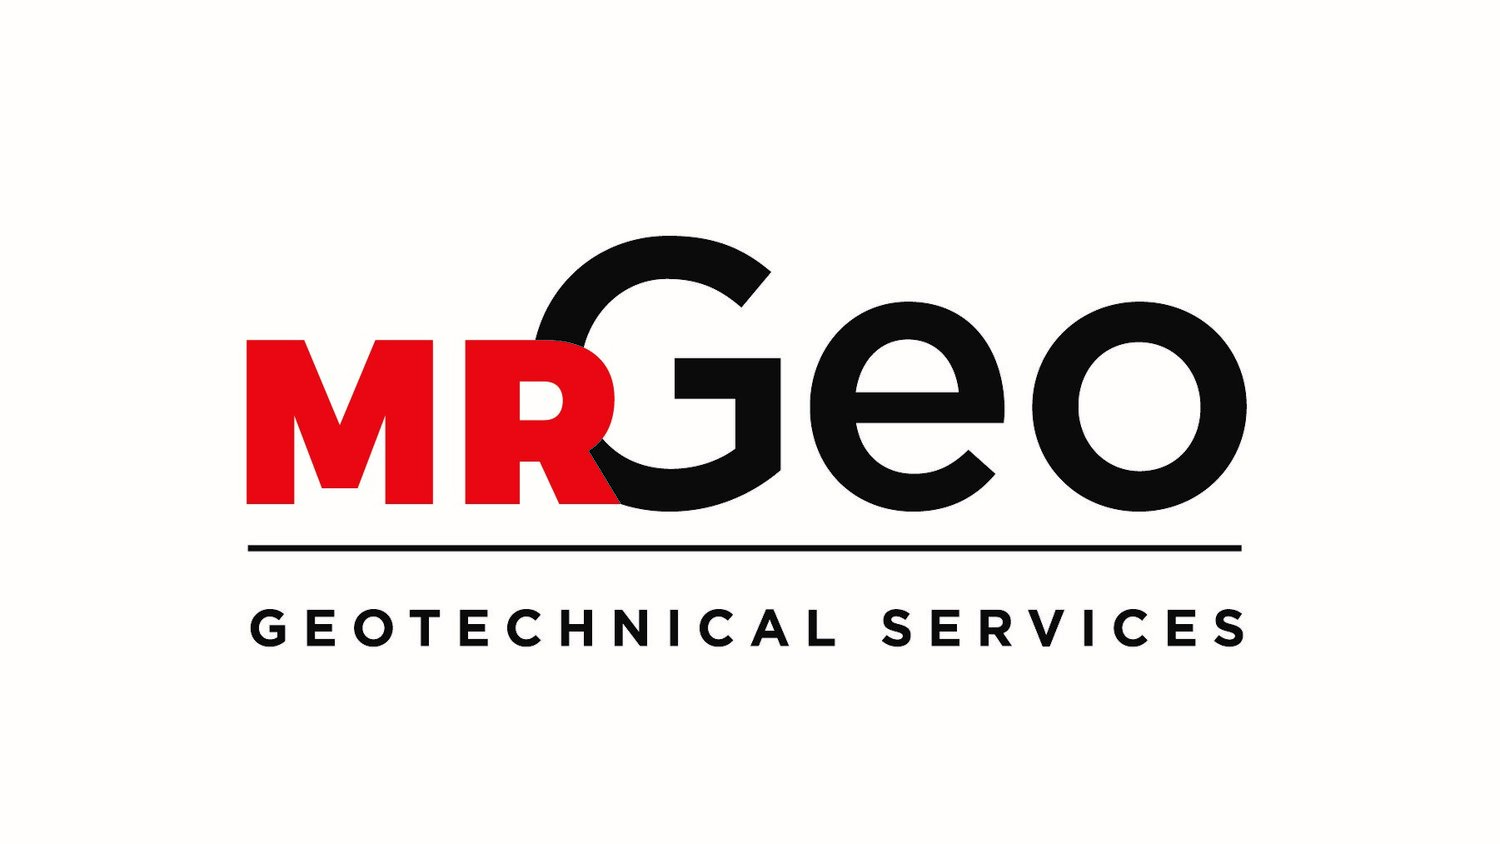 MR Geotechnical Services